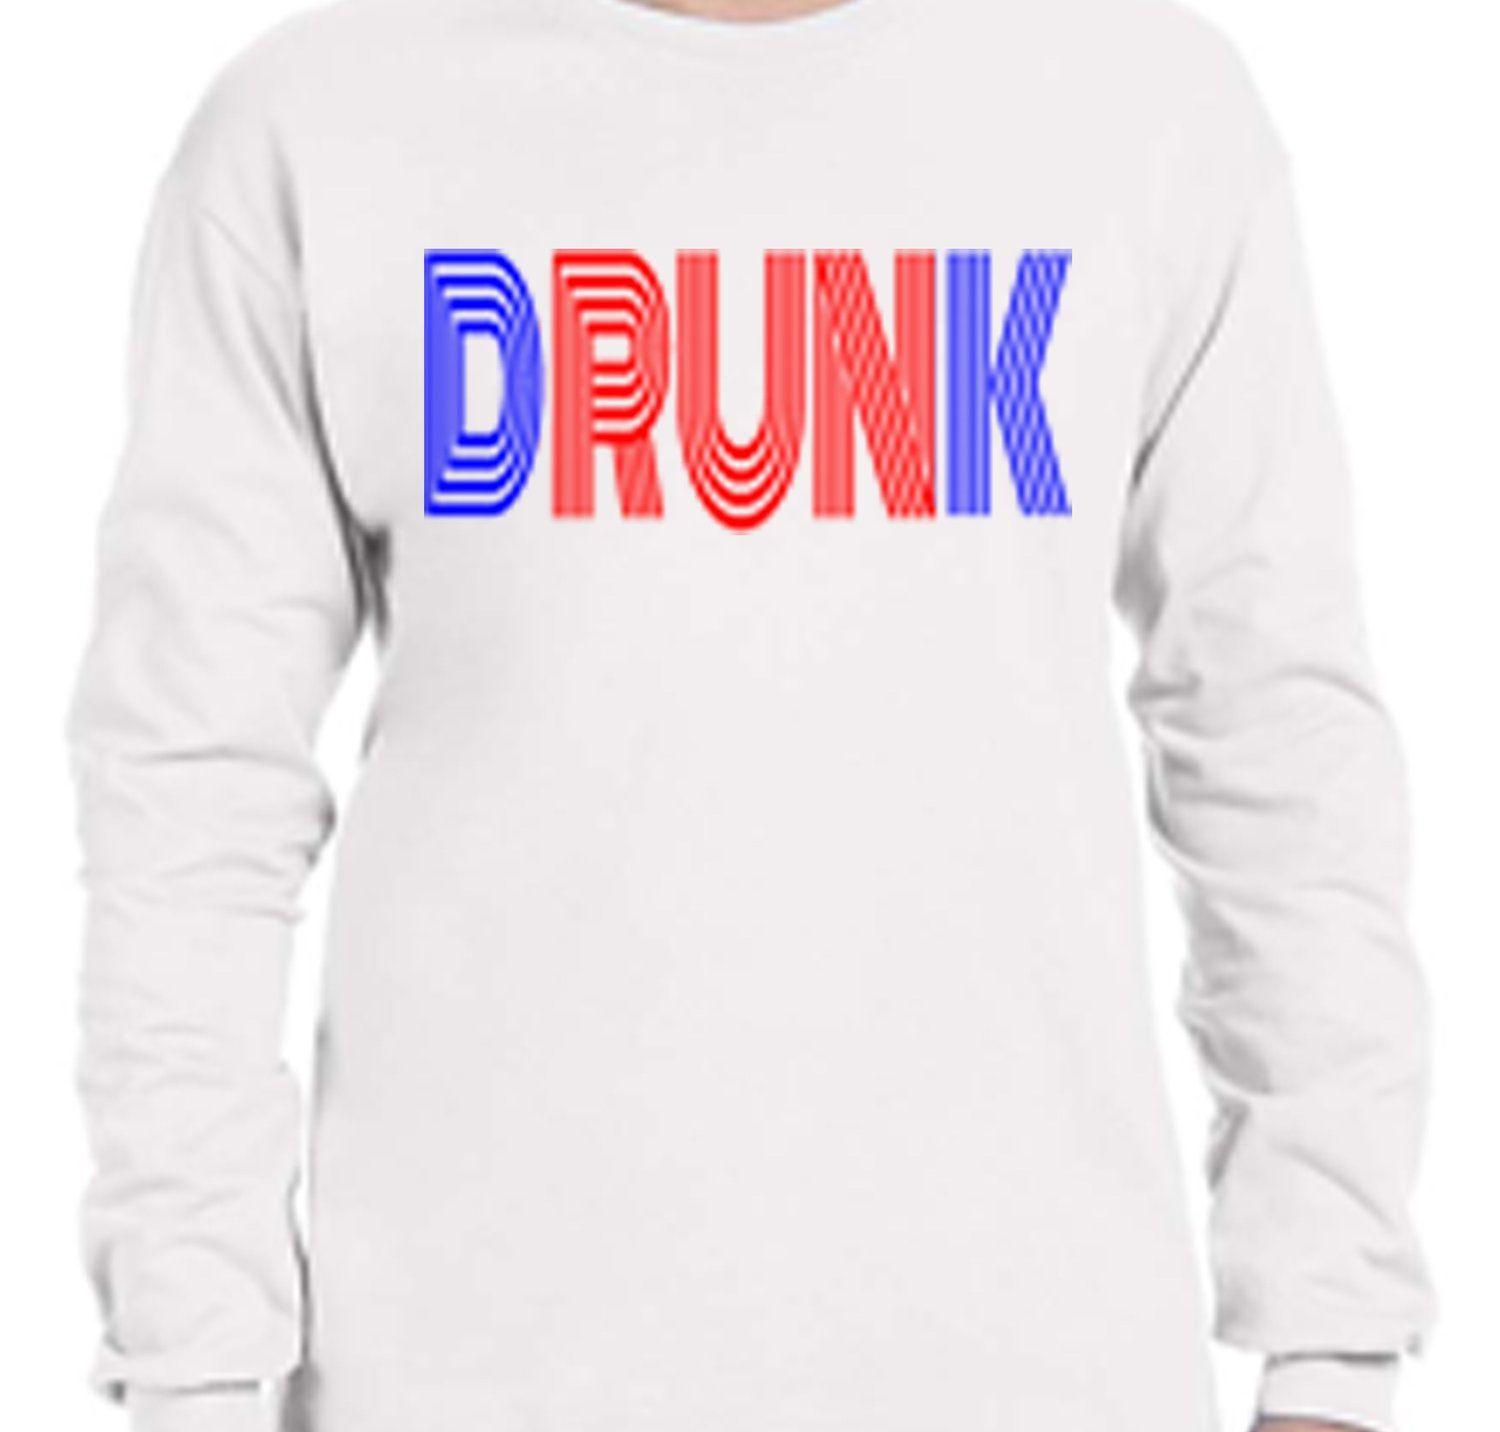 Between Red White and Blue Lines Logo - DRUNK WEAR — DRUNK LINES RED WHITE BLUE